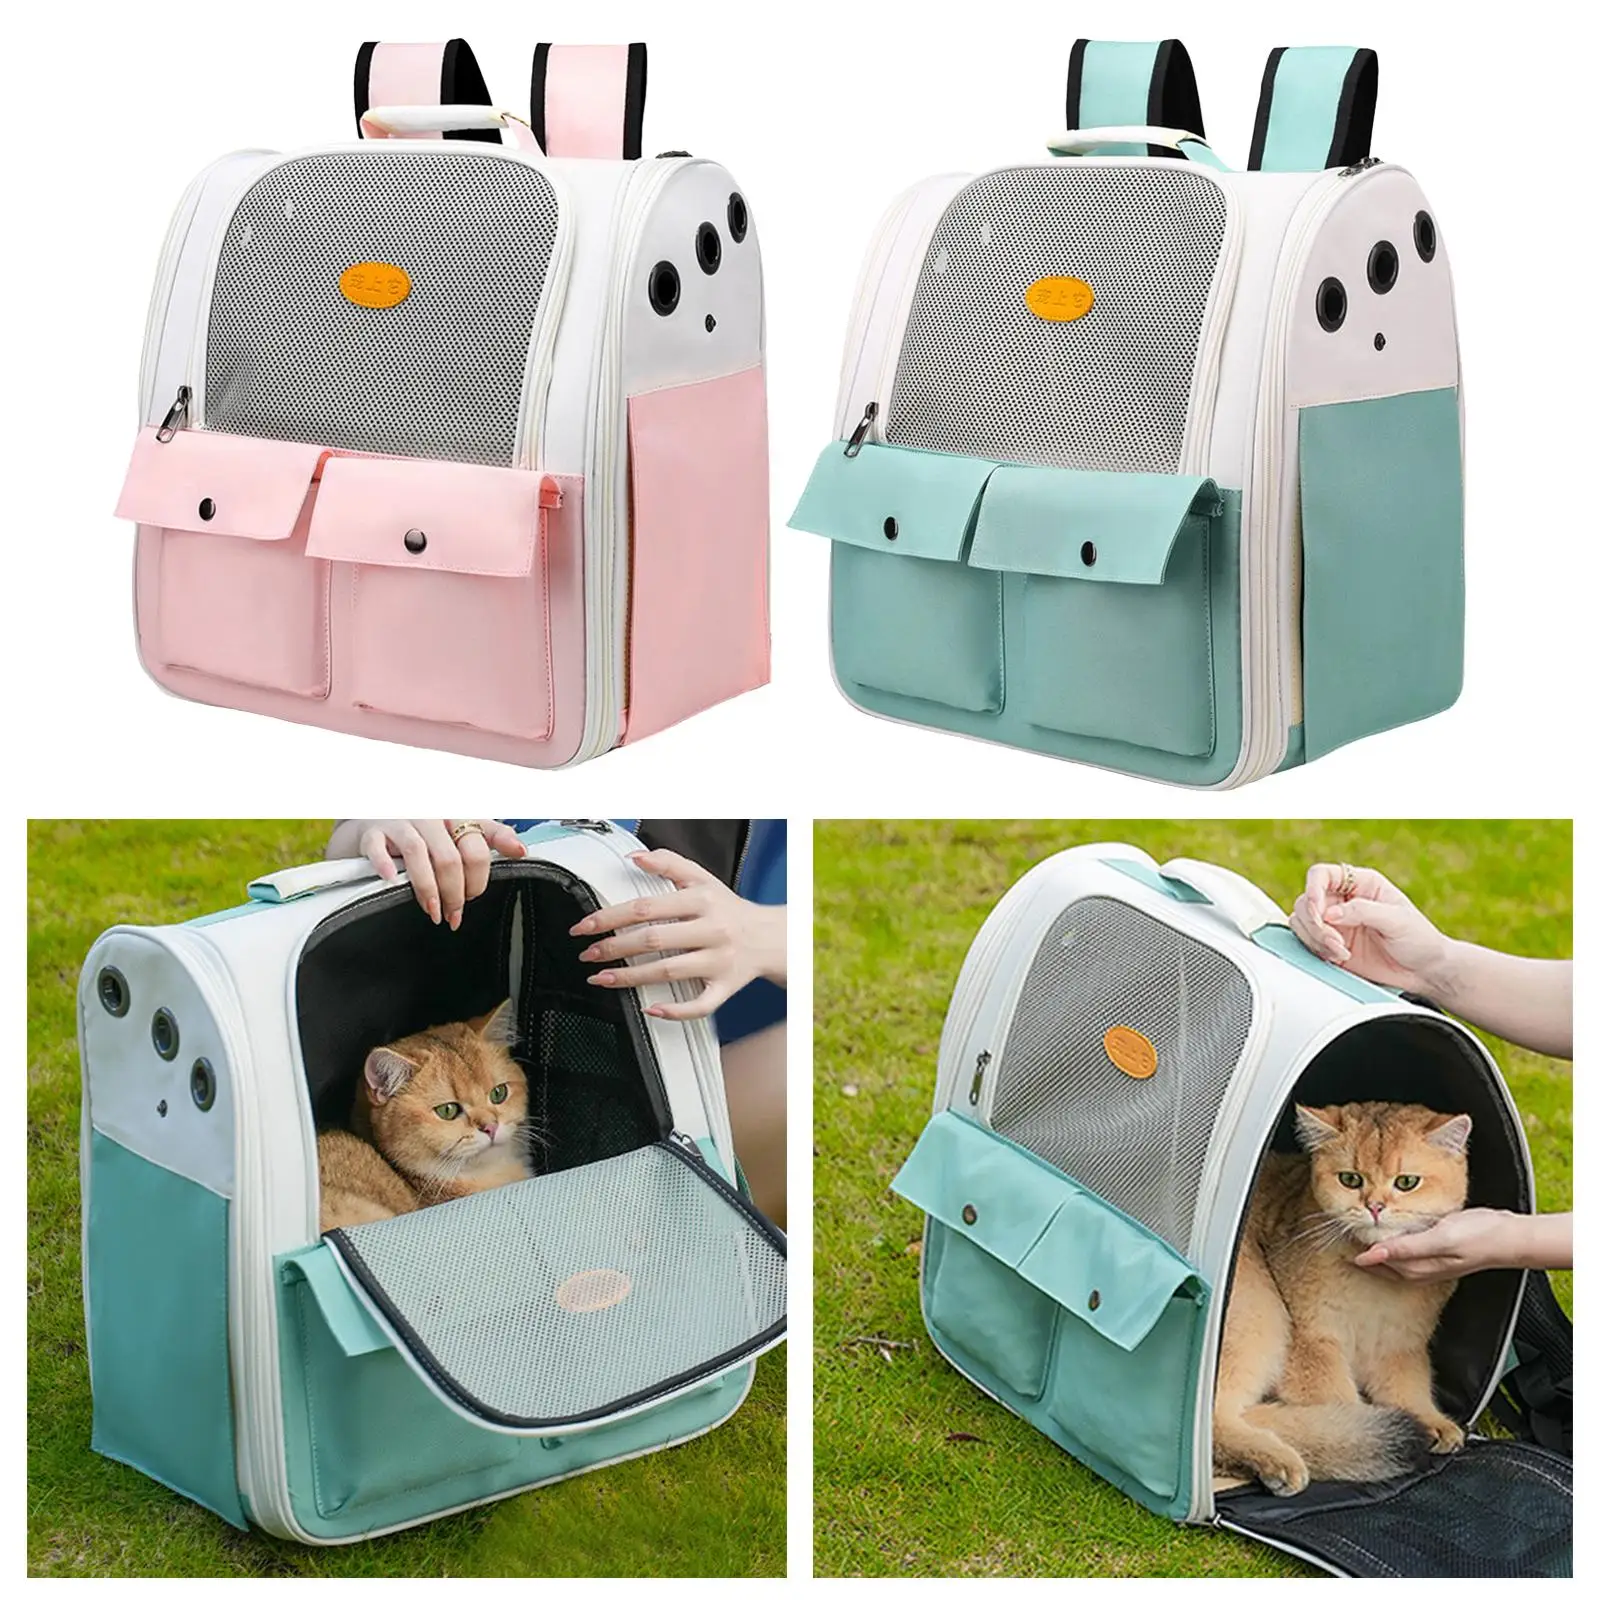 Cat Carriers Breathable Adjustable Strap Collapsible Multifunction Pet Travel Bag Carrying Bags for Camping Traveling Hiking Dog